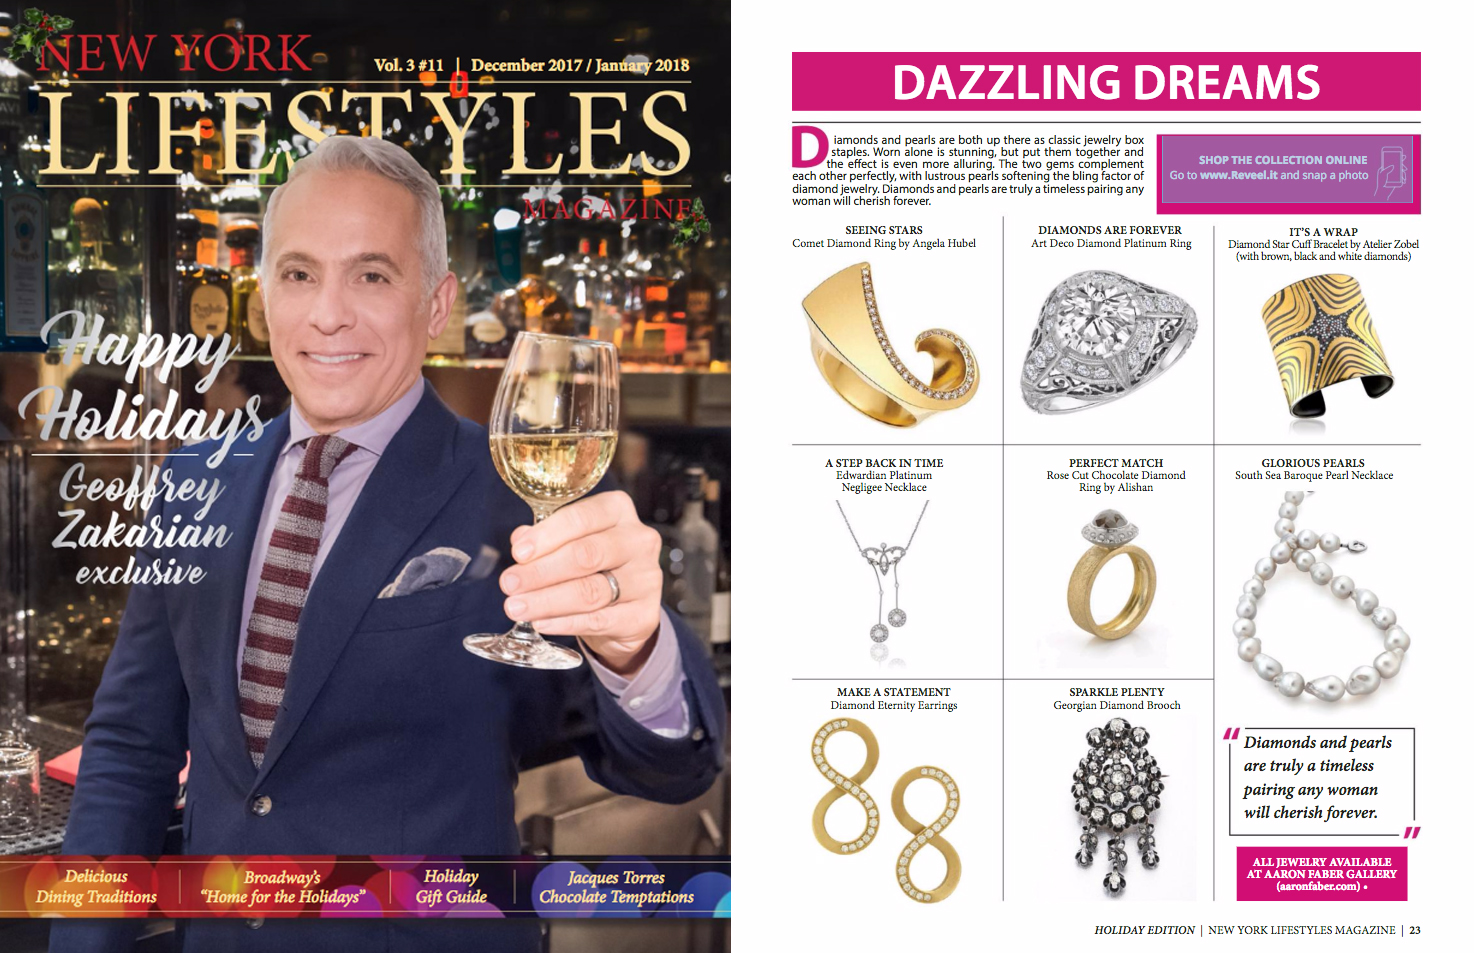 AARON FABER GALLERY FEATURED IN NEW YORK LIFESTYLES MAGAZINE